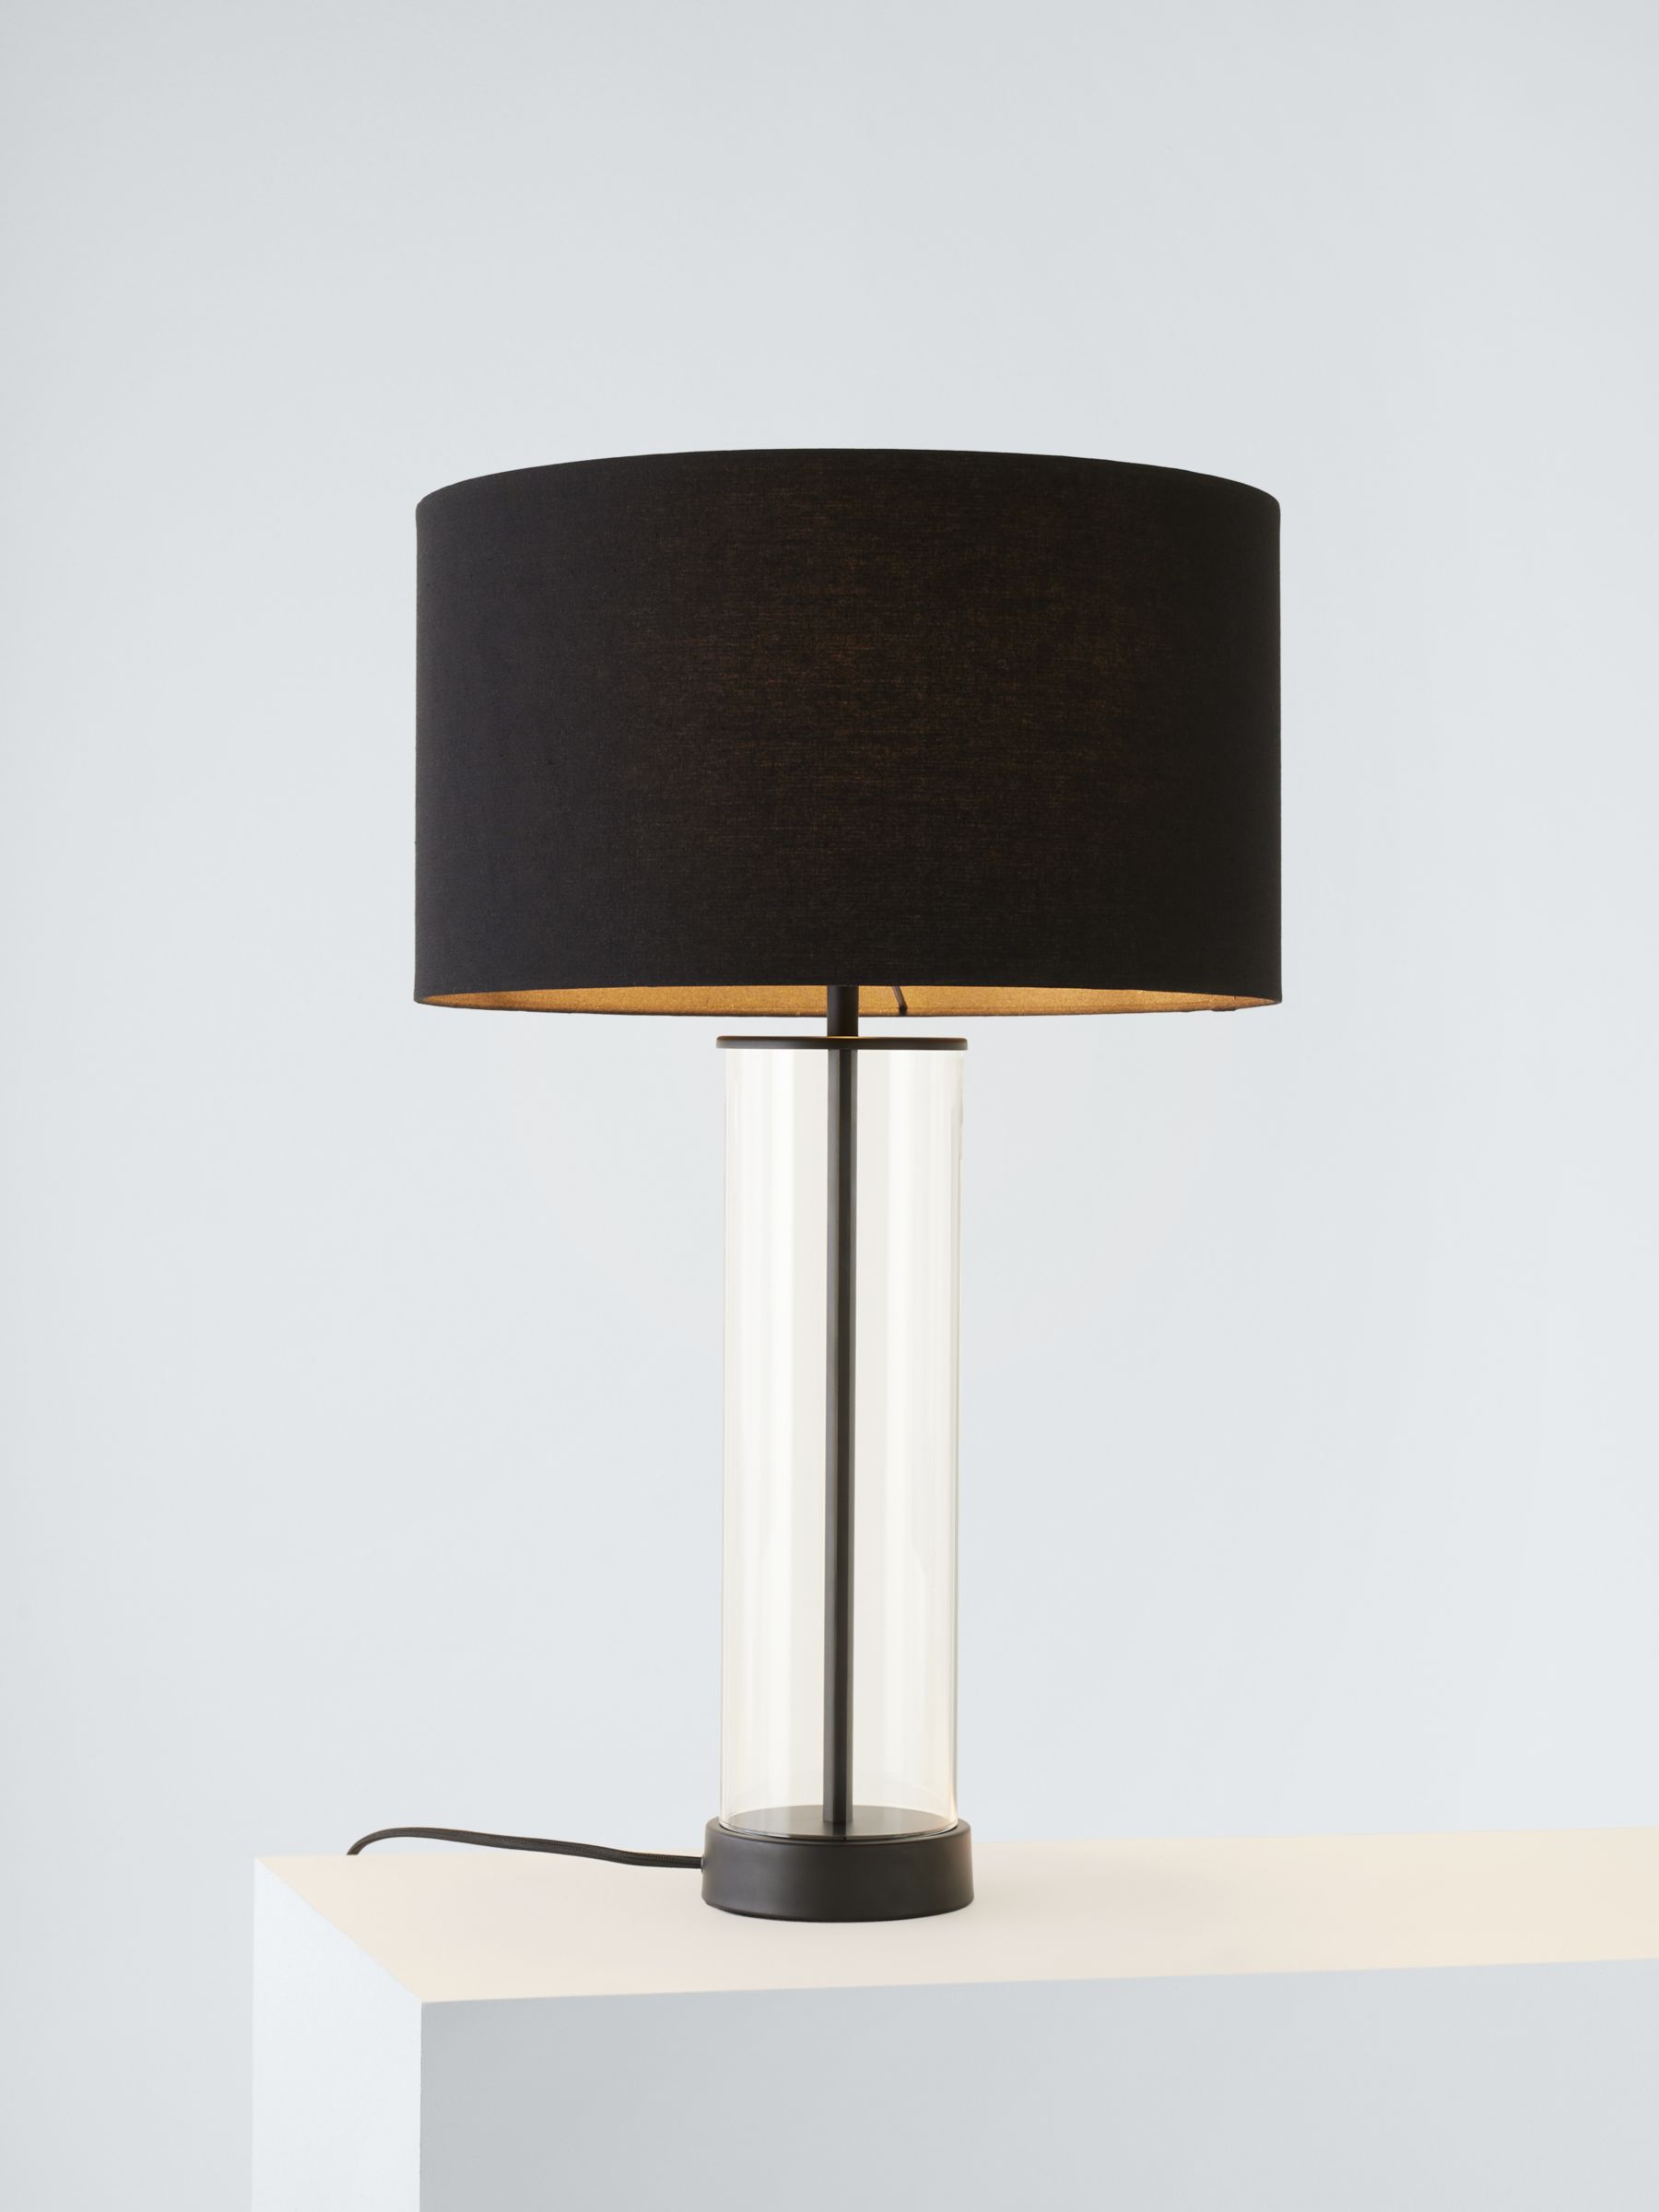 Bay Lighting Grace Glass Touch Table Lamp